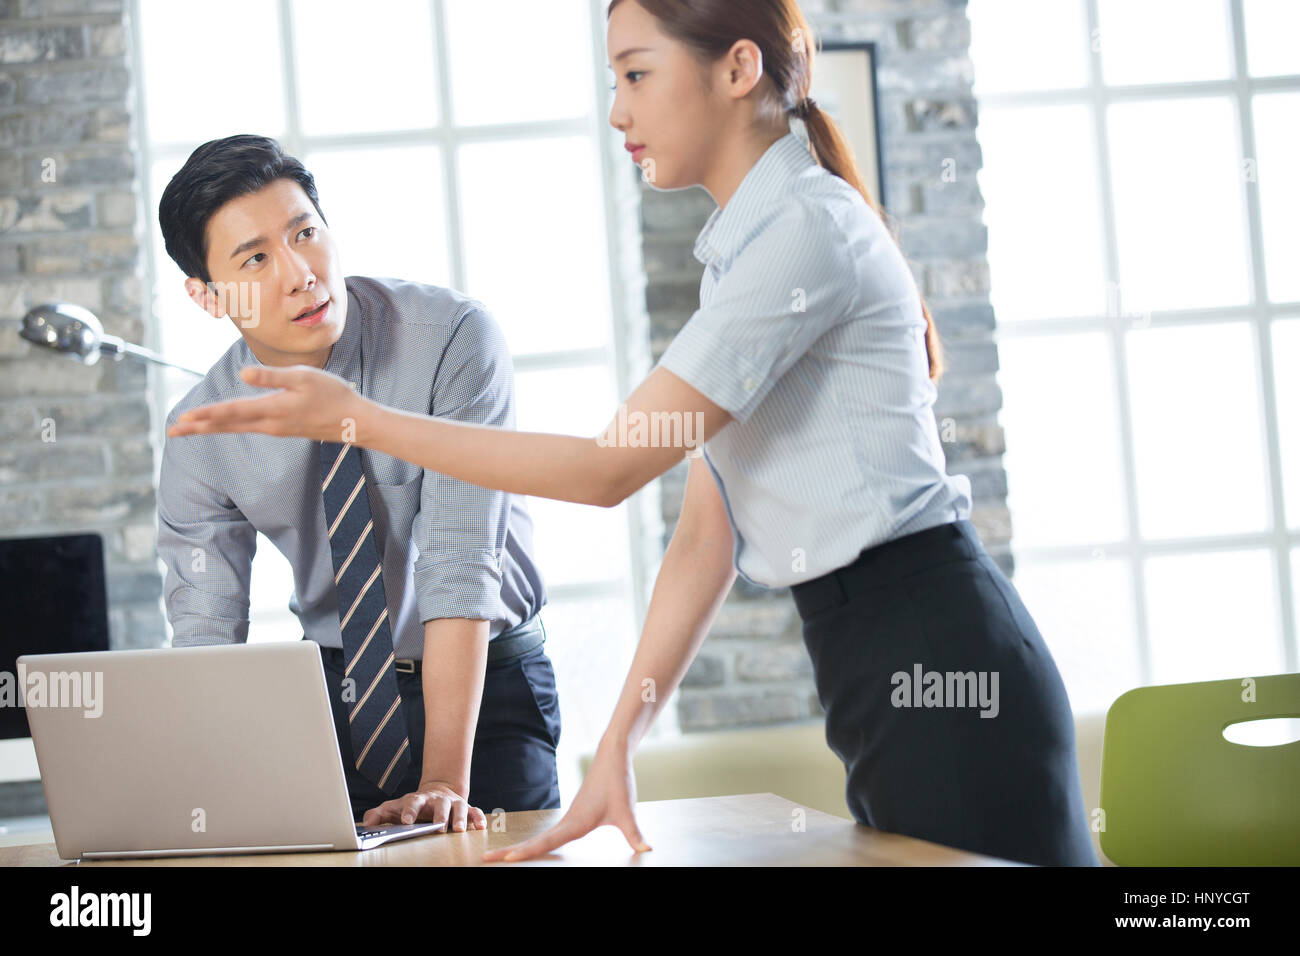 Business people at work Stock Photo